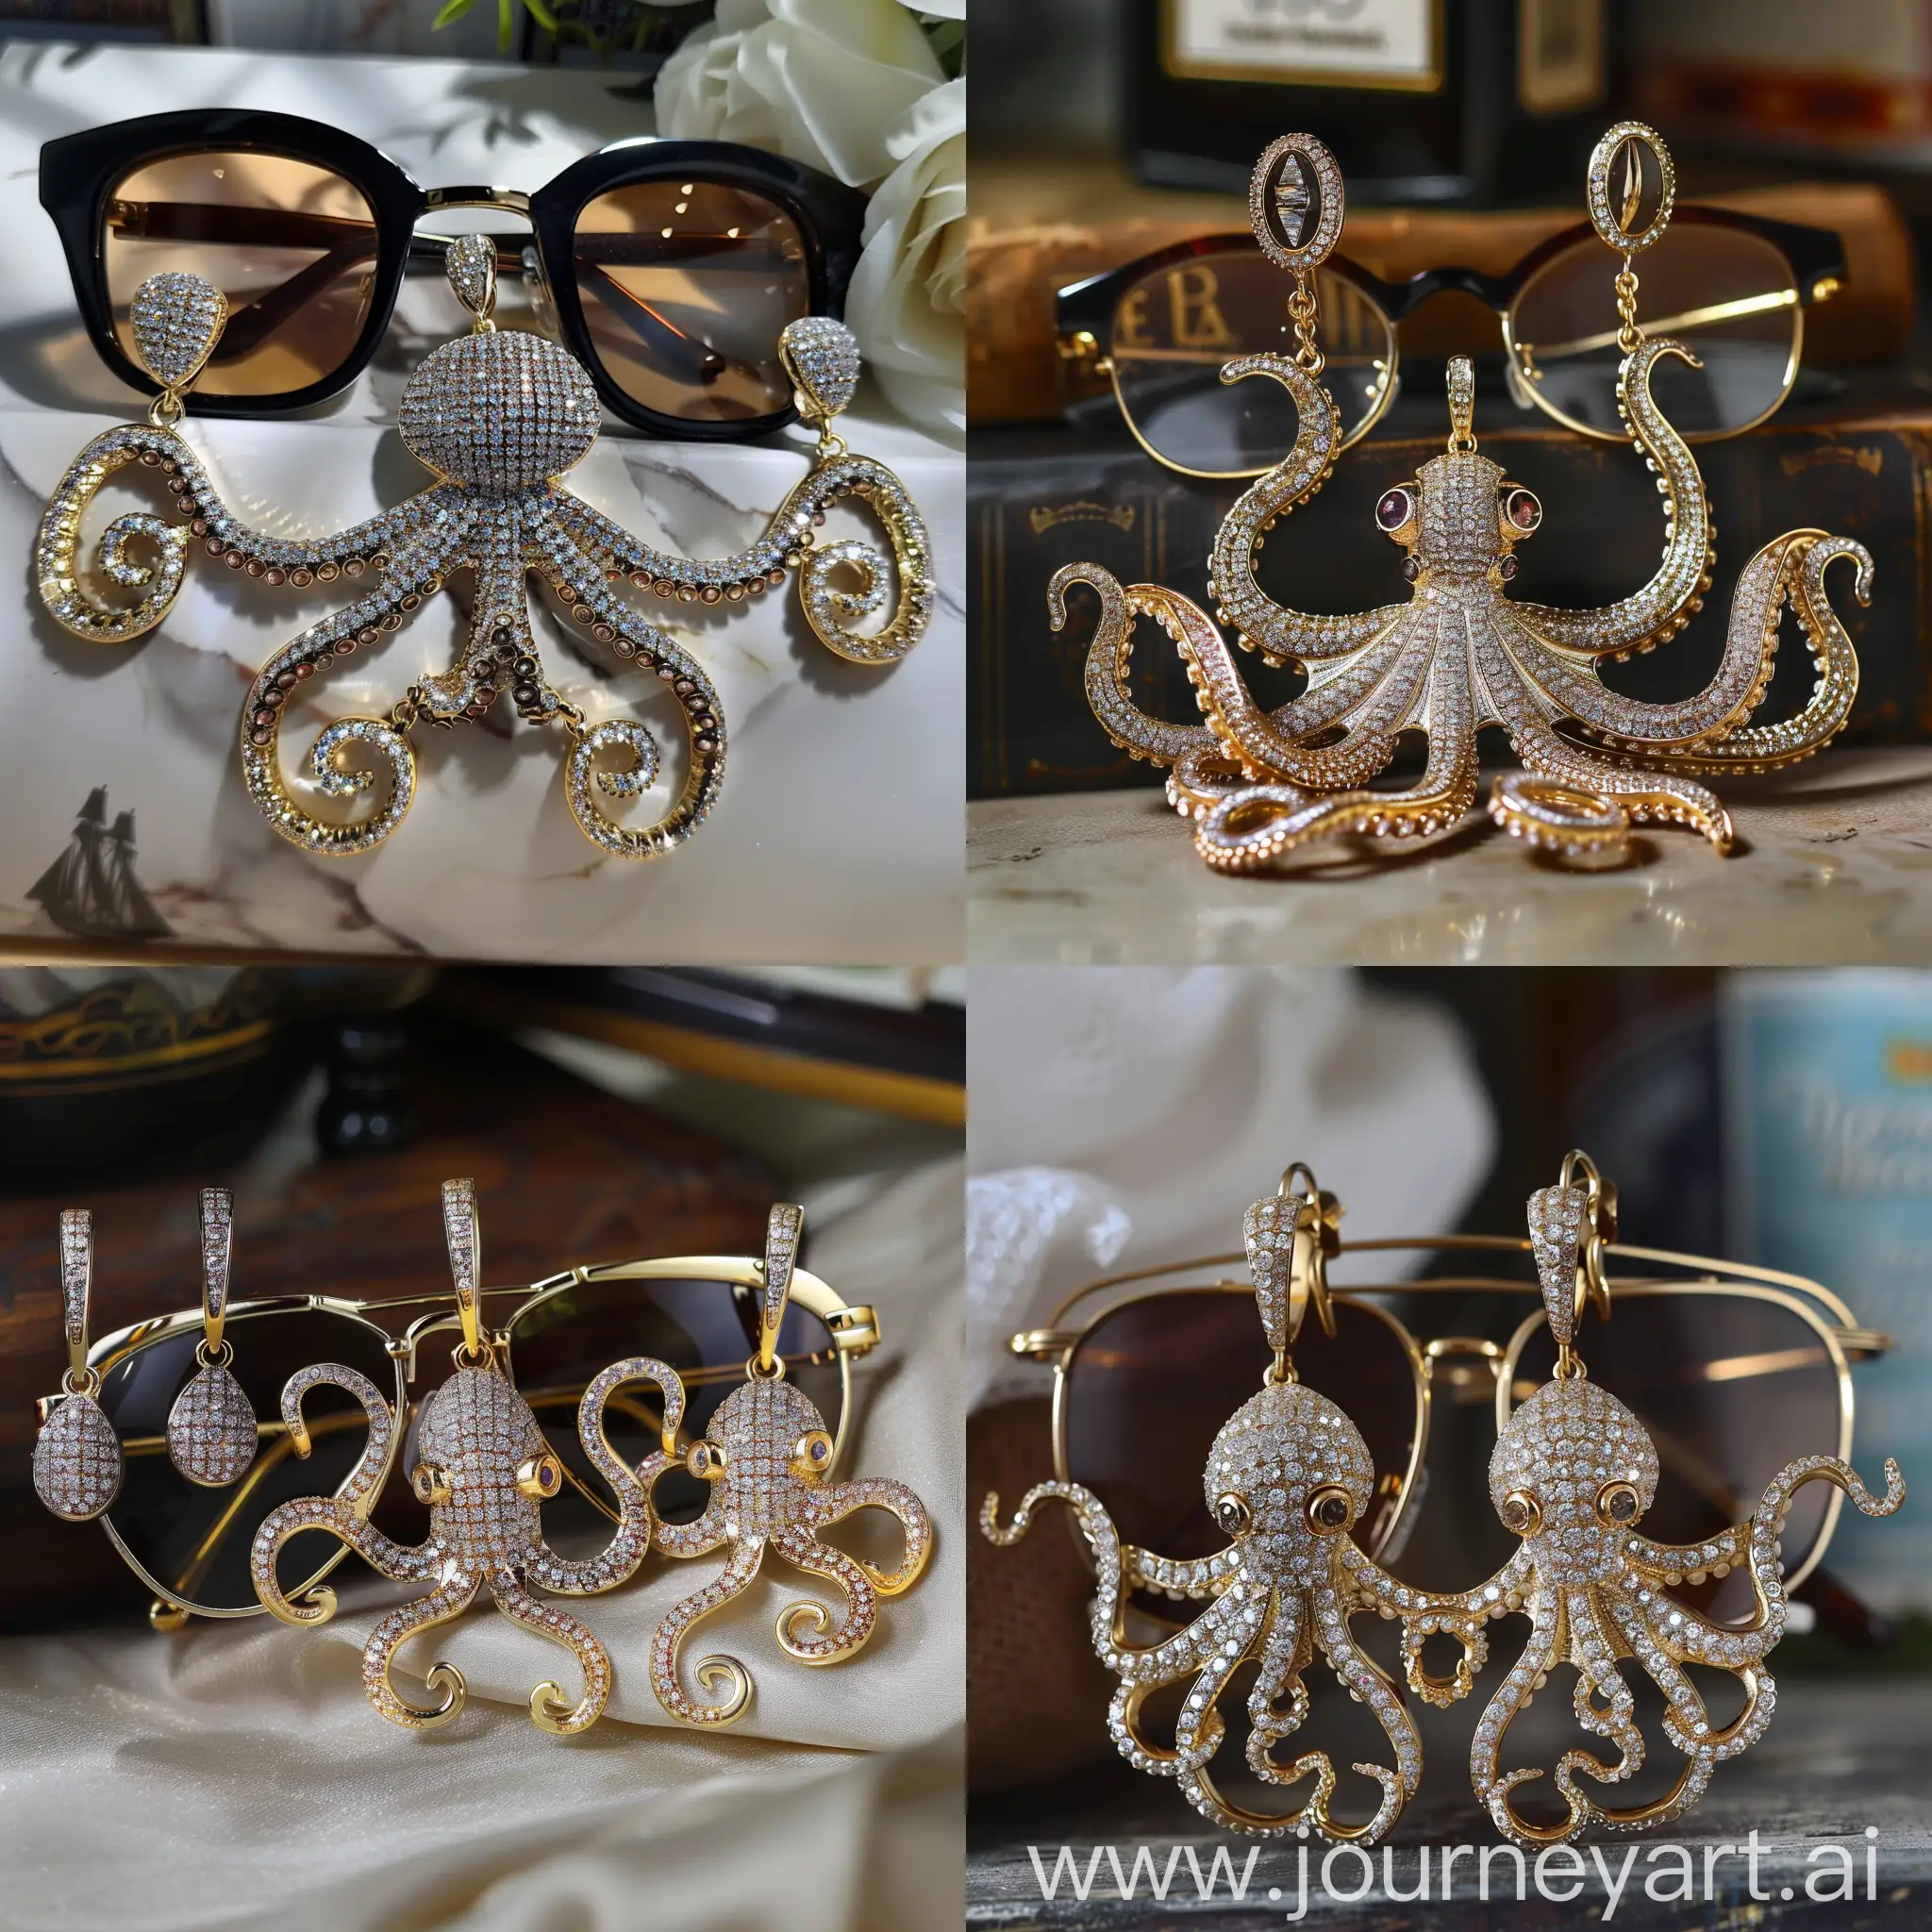 fancy set of gold pendants and earrings in the shape of an octopus with jewels on its arms and a glasses with very fancy eyes
